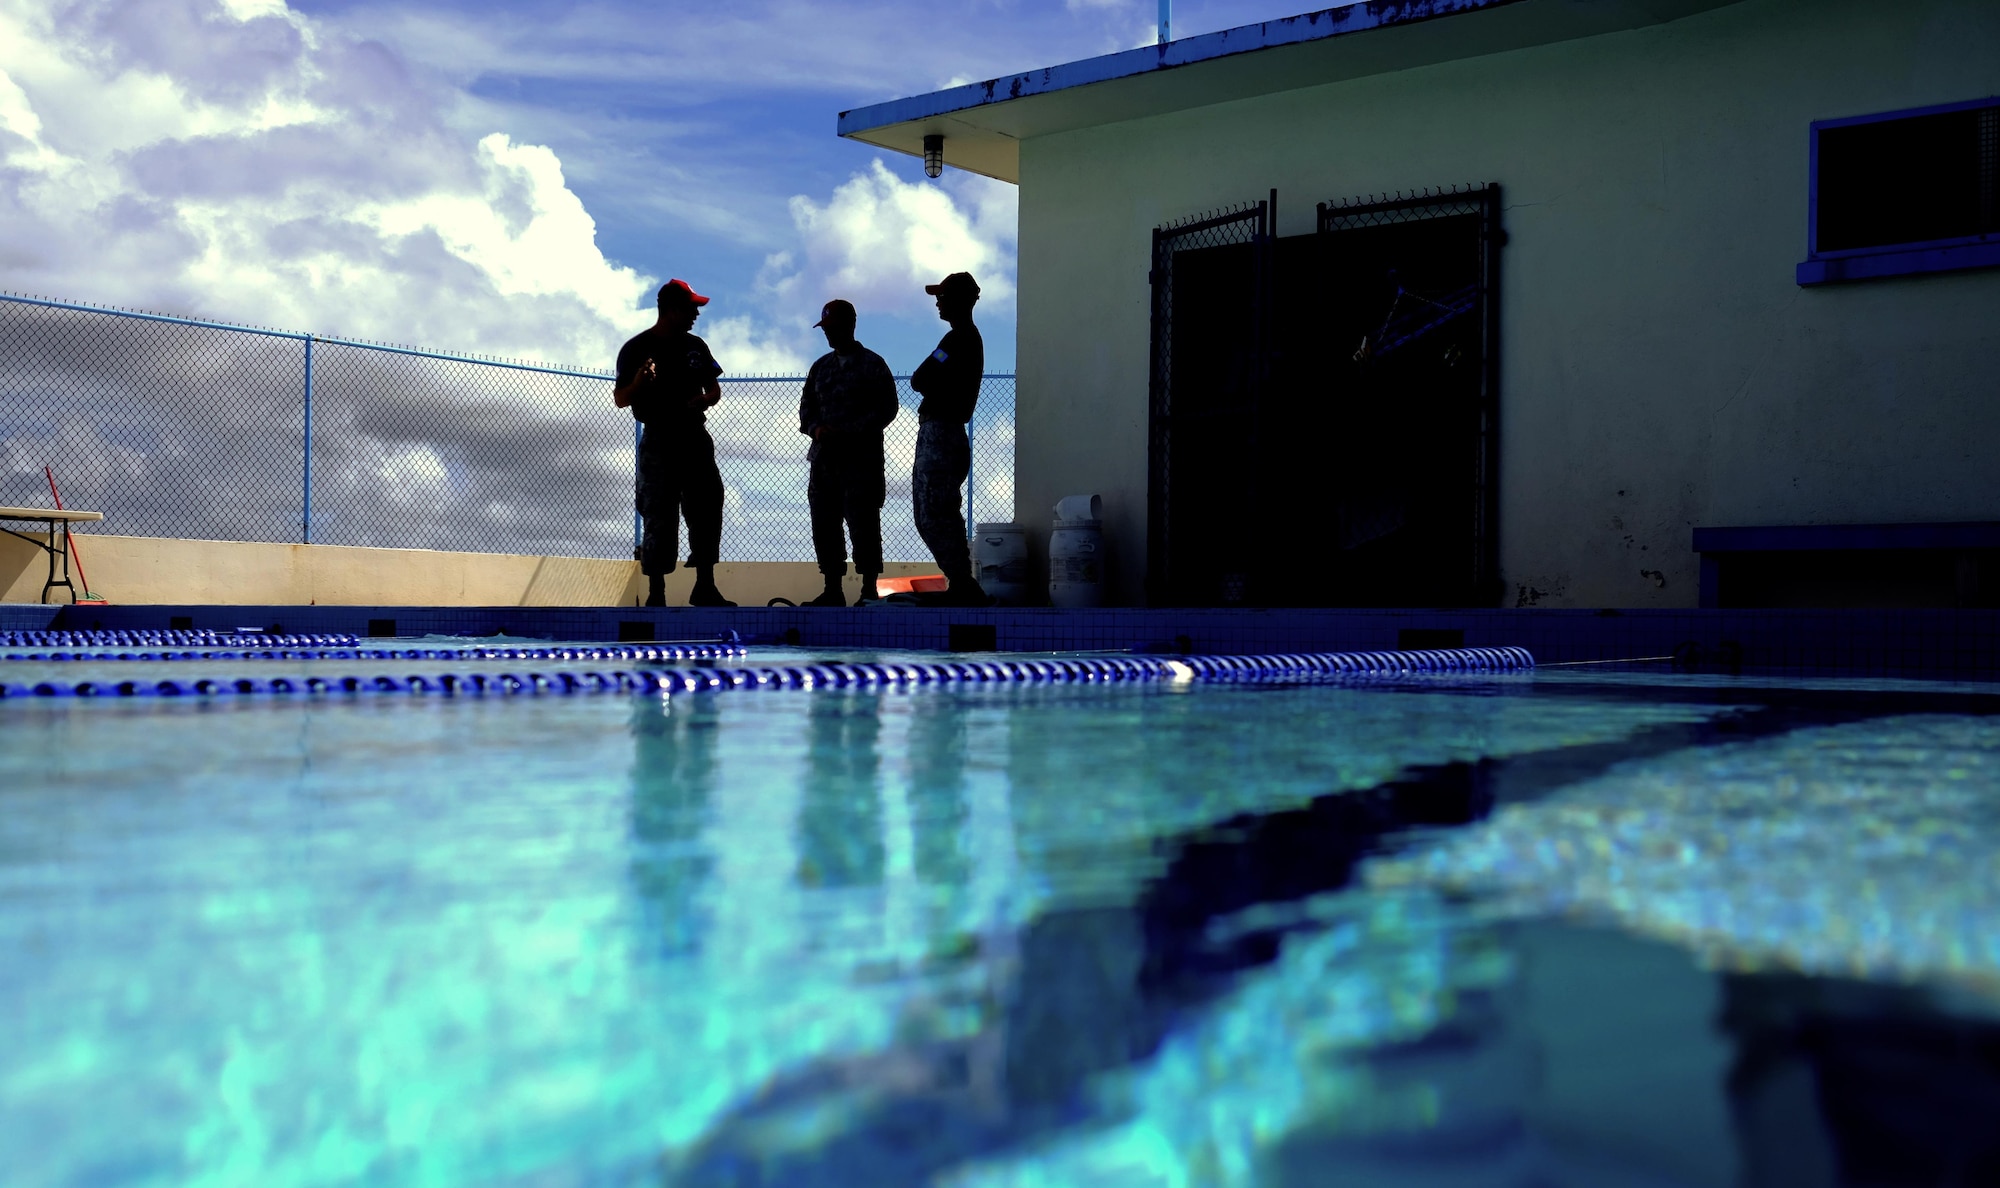 Members of Civil Action Team 554-01 made up of Airmen from the 554th Red Horse Squardon and 36th Civil Engineer Squadron at Andersen Air Force Base, Guam discuss their recently completed project – The Palau National Olympic Swimming Pool.  The pool measured nearly 88,000 cubic feet and was stripped, resurfaced and re-tiled. (U.S. Air Force photo by Staff Sgt. Christopher Stoltz/Released)